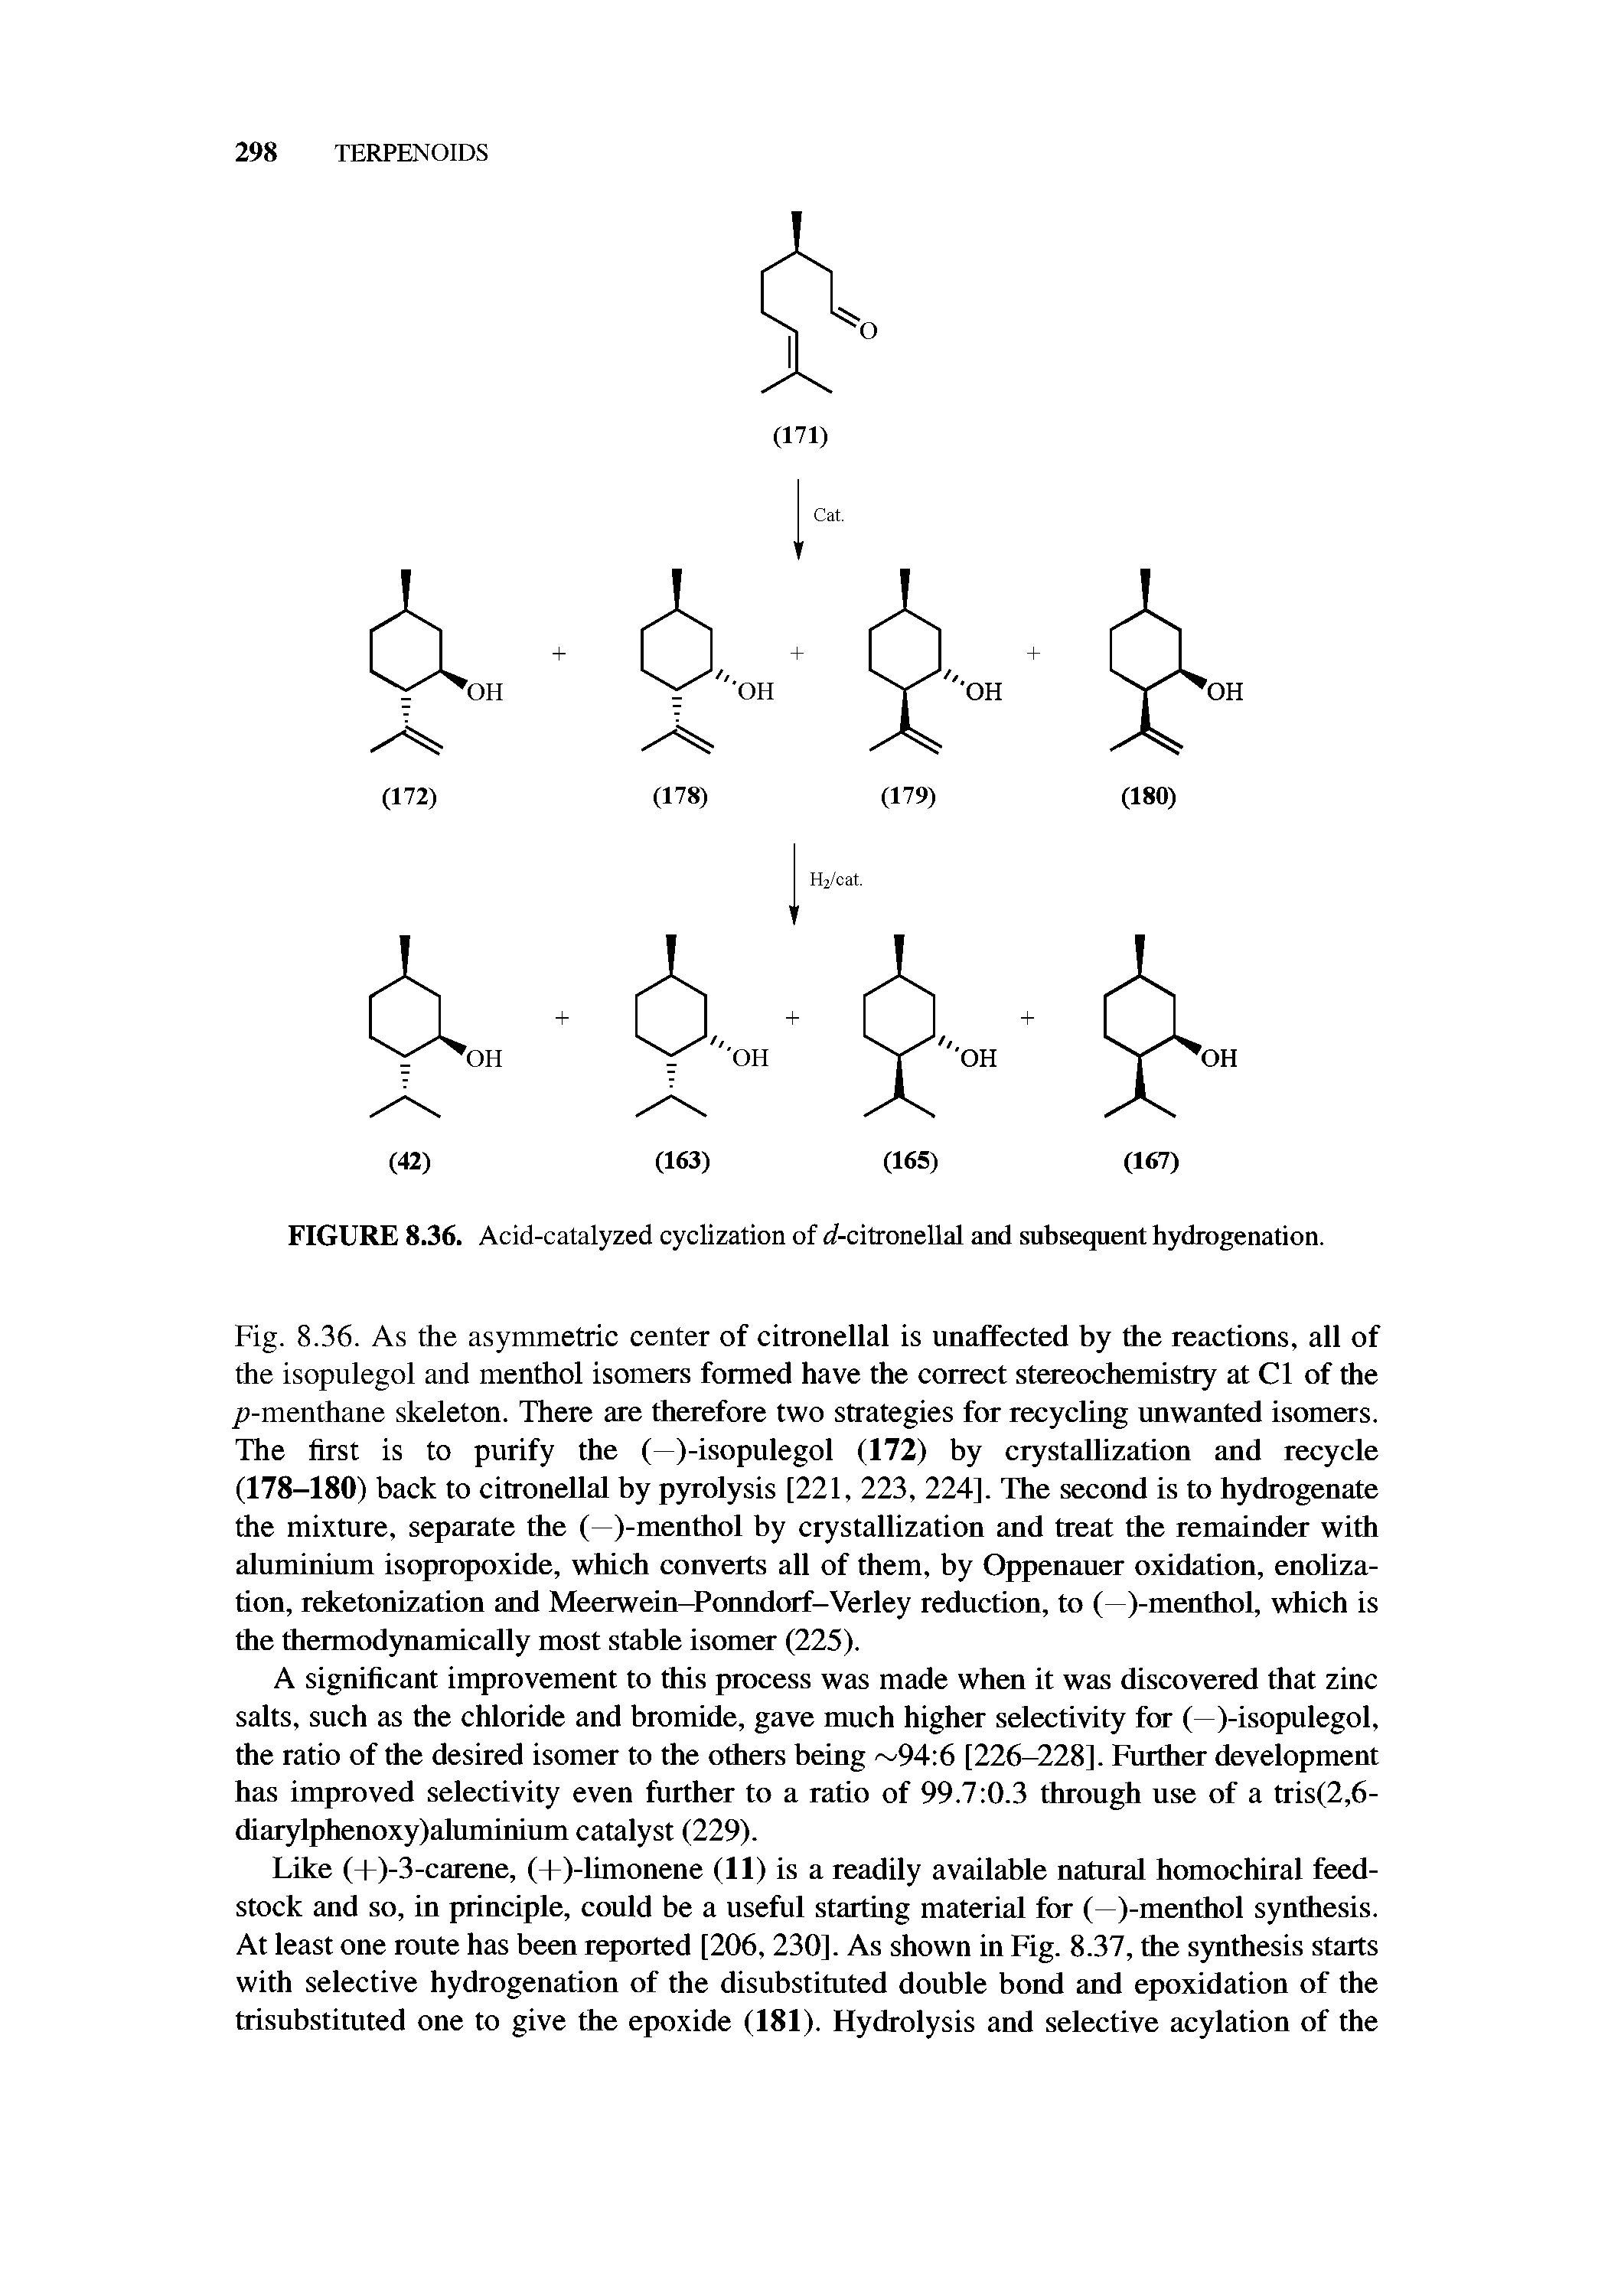 Fig. 8.36. As the asymmetric center of citronellal is unaffected by the reactions, all of the isopulegol and menthol isomers formed have the correct stereochemistry at Cl of the /i-menthane skeleton. There are therefore two strategies for recycling unwanted isomers. The first is to purify the ( )-isopulegol (172) by crystallization and recycle (178-180) back to citronellal by pyrolysis [221, 223, 224]. The second is to hydrogenate the mixture, separate the (—)-menthol by crystallization and treat the remainder with aluminium isopropoxide, which converts all of them, by Oppenauer oxidation, enoliza-tion, reketonization and Meerwein-Ponndorf-Verley reduction, to (—)-menthol, which is the thermodynamically most stable isomer (225).